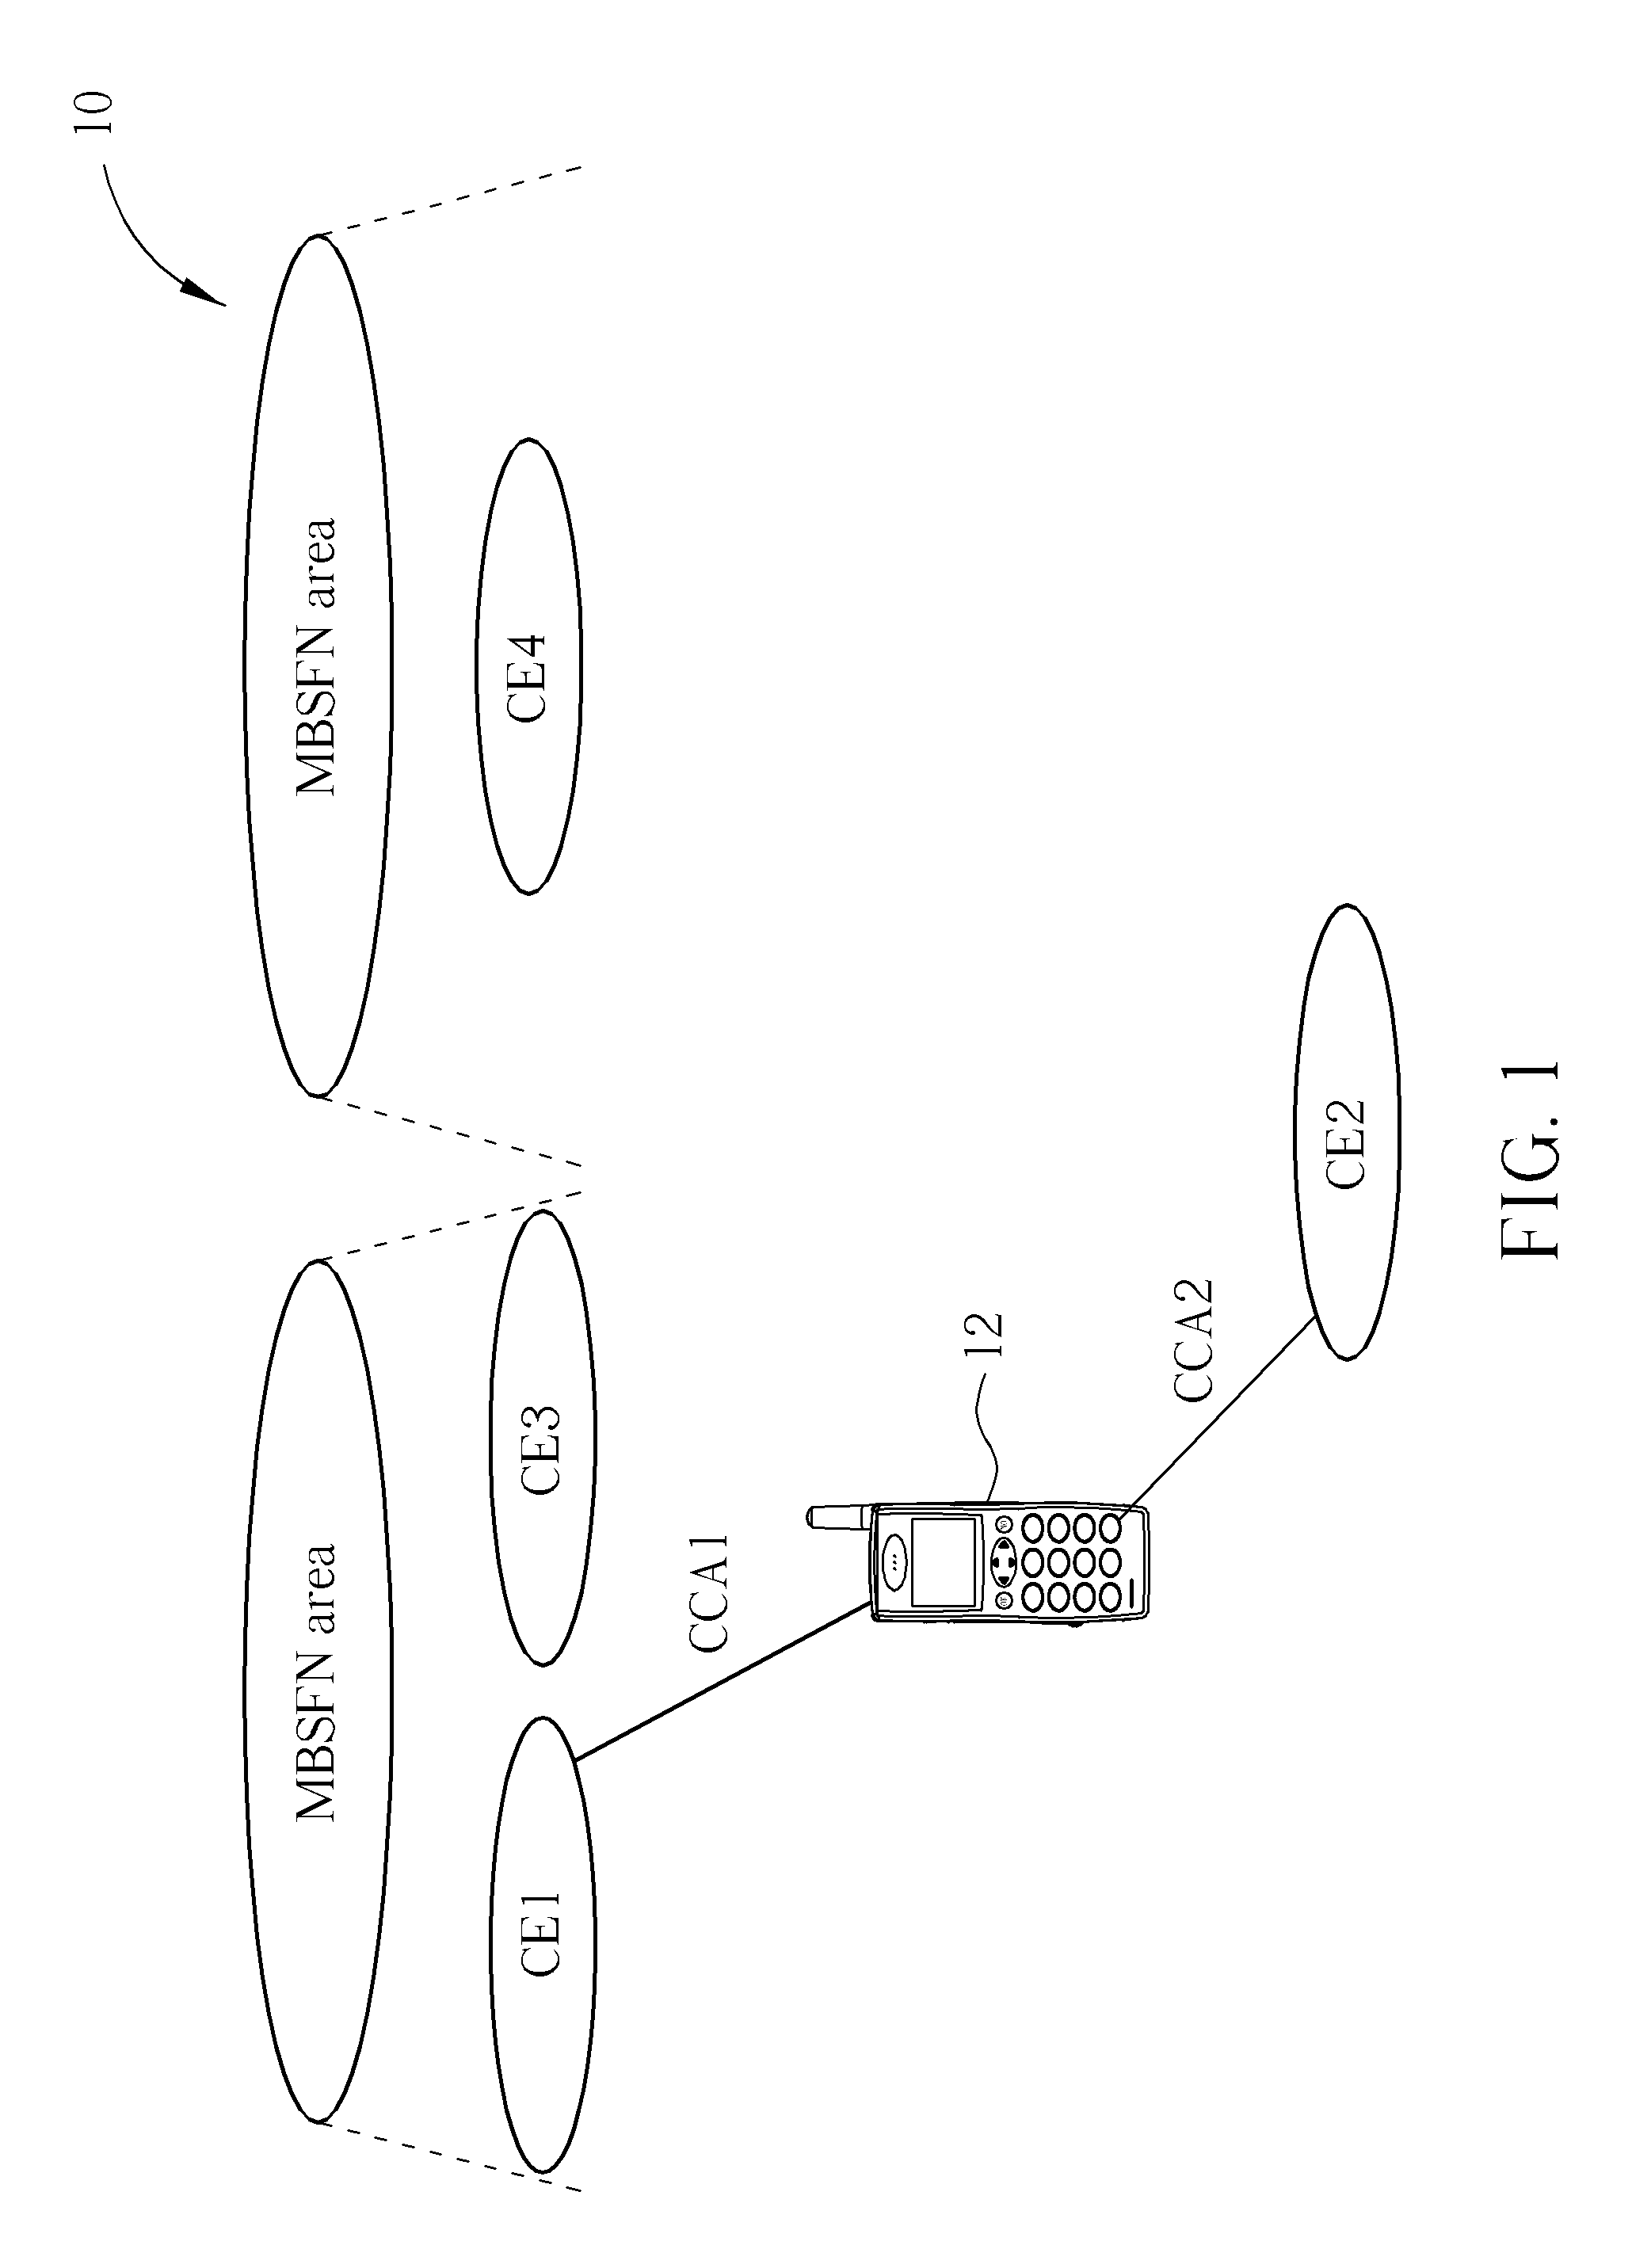 Method of Handling Multimedia Broadcast and Multicast Service Transmission and Reception and Related Communication Device